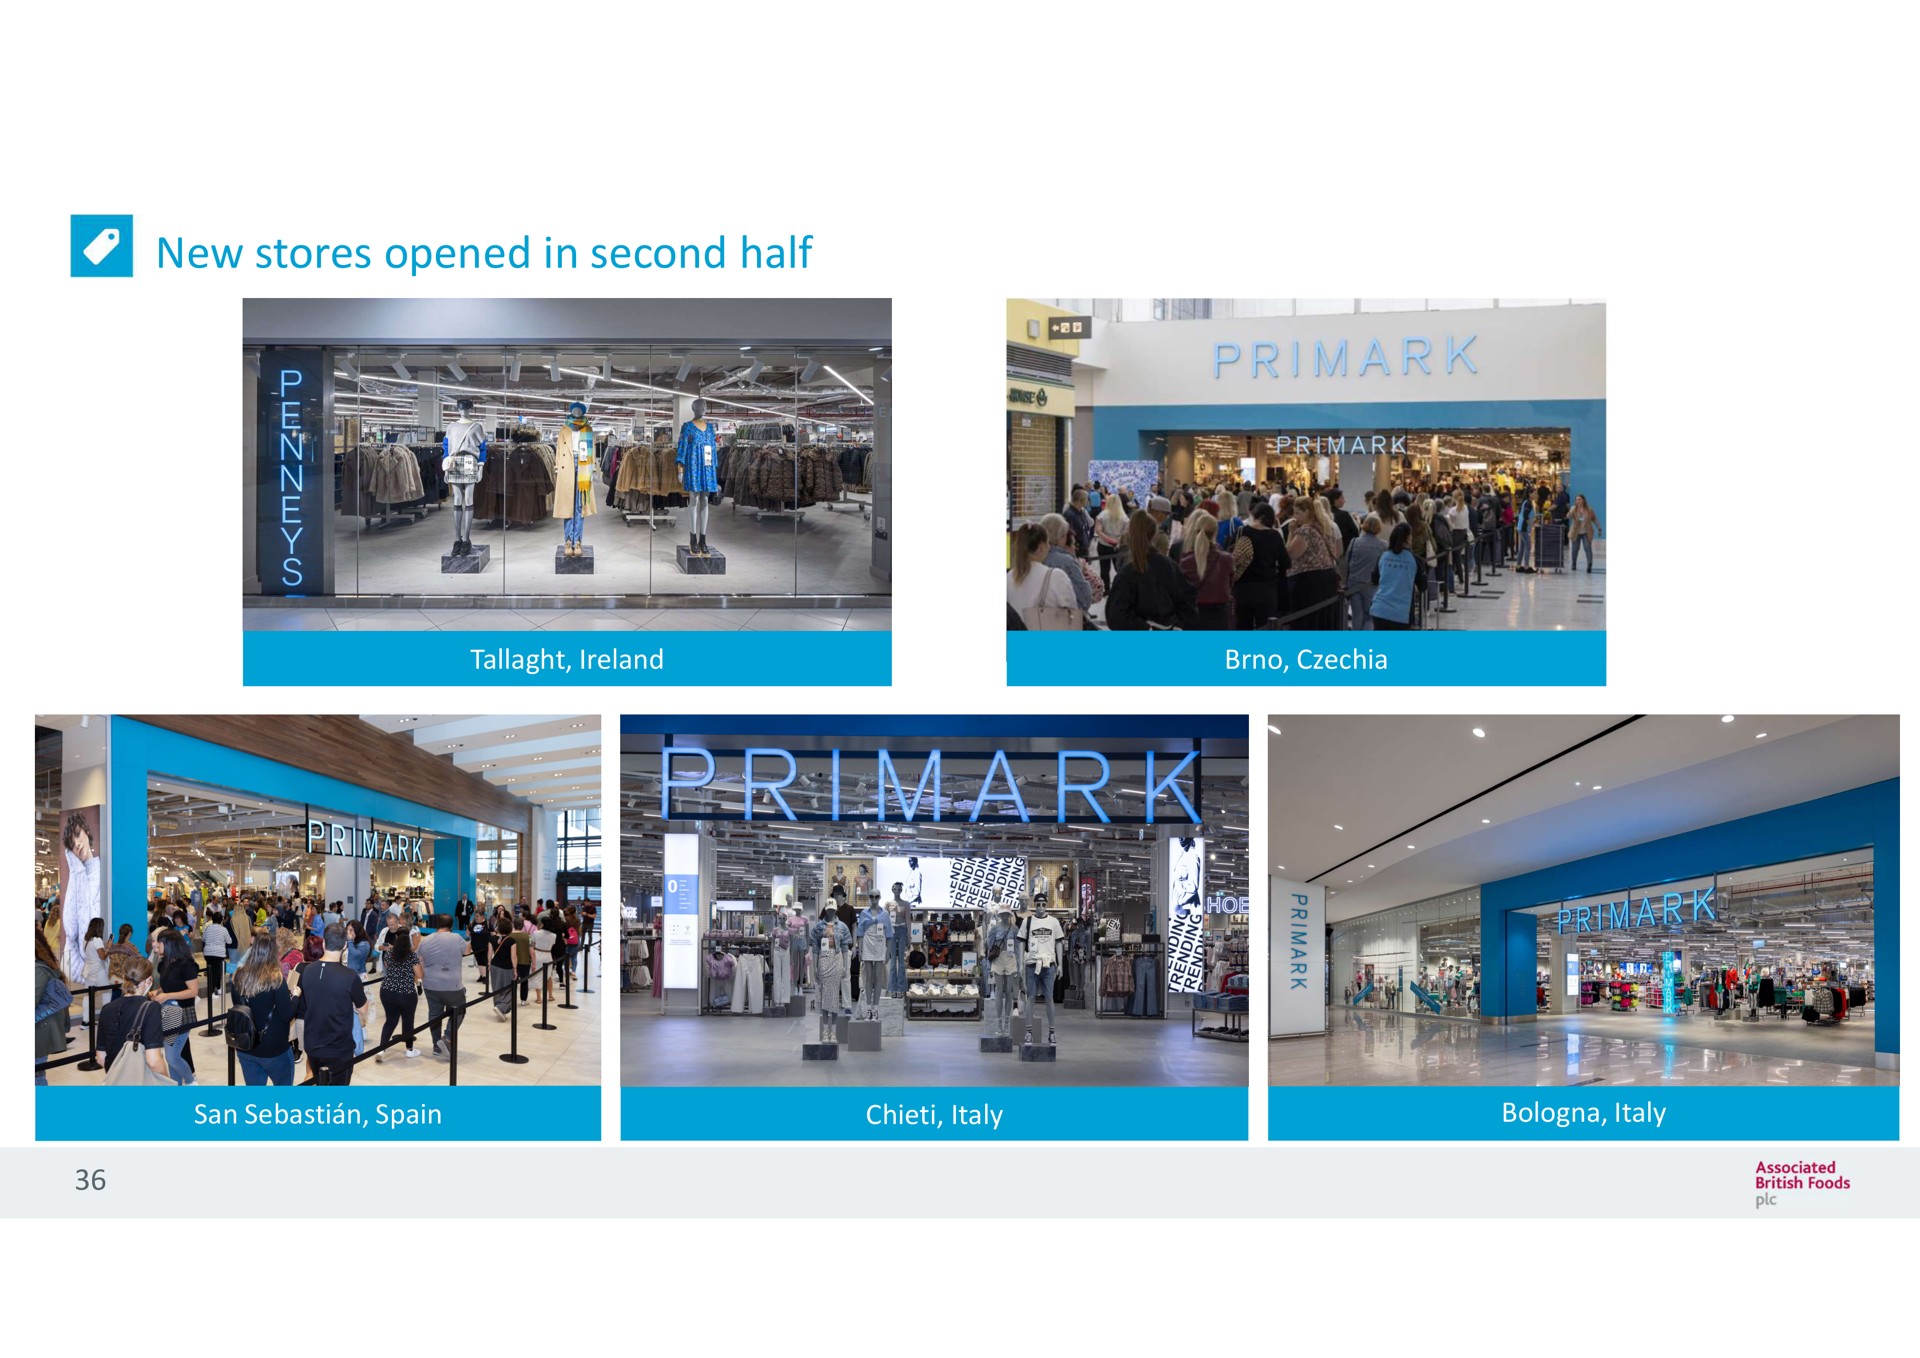 new stores opened in second half | Associated British Foods